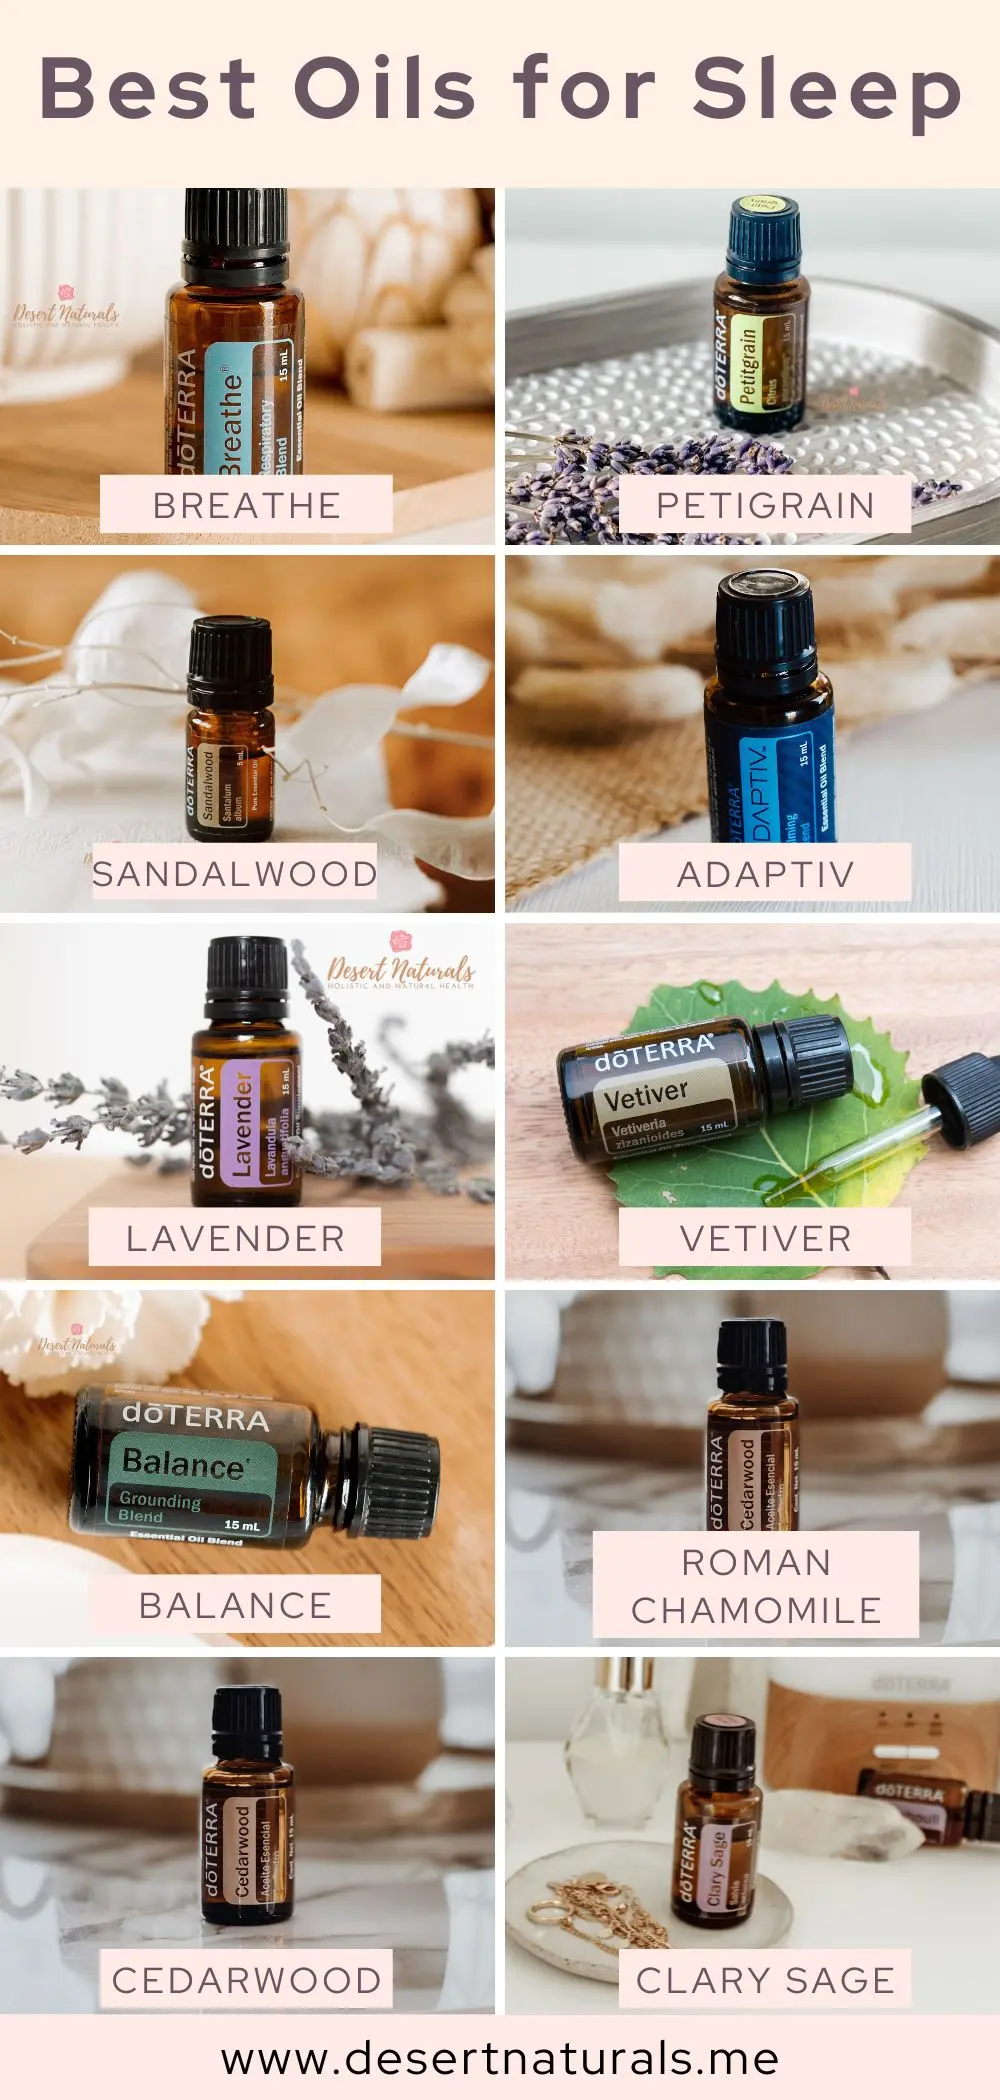 Images of some of the best doterra essential oils for sleep